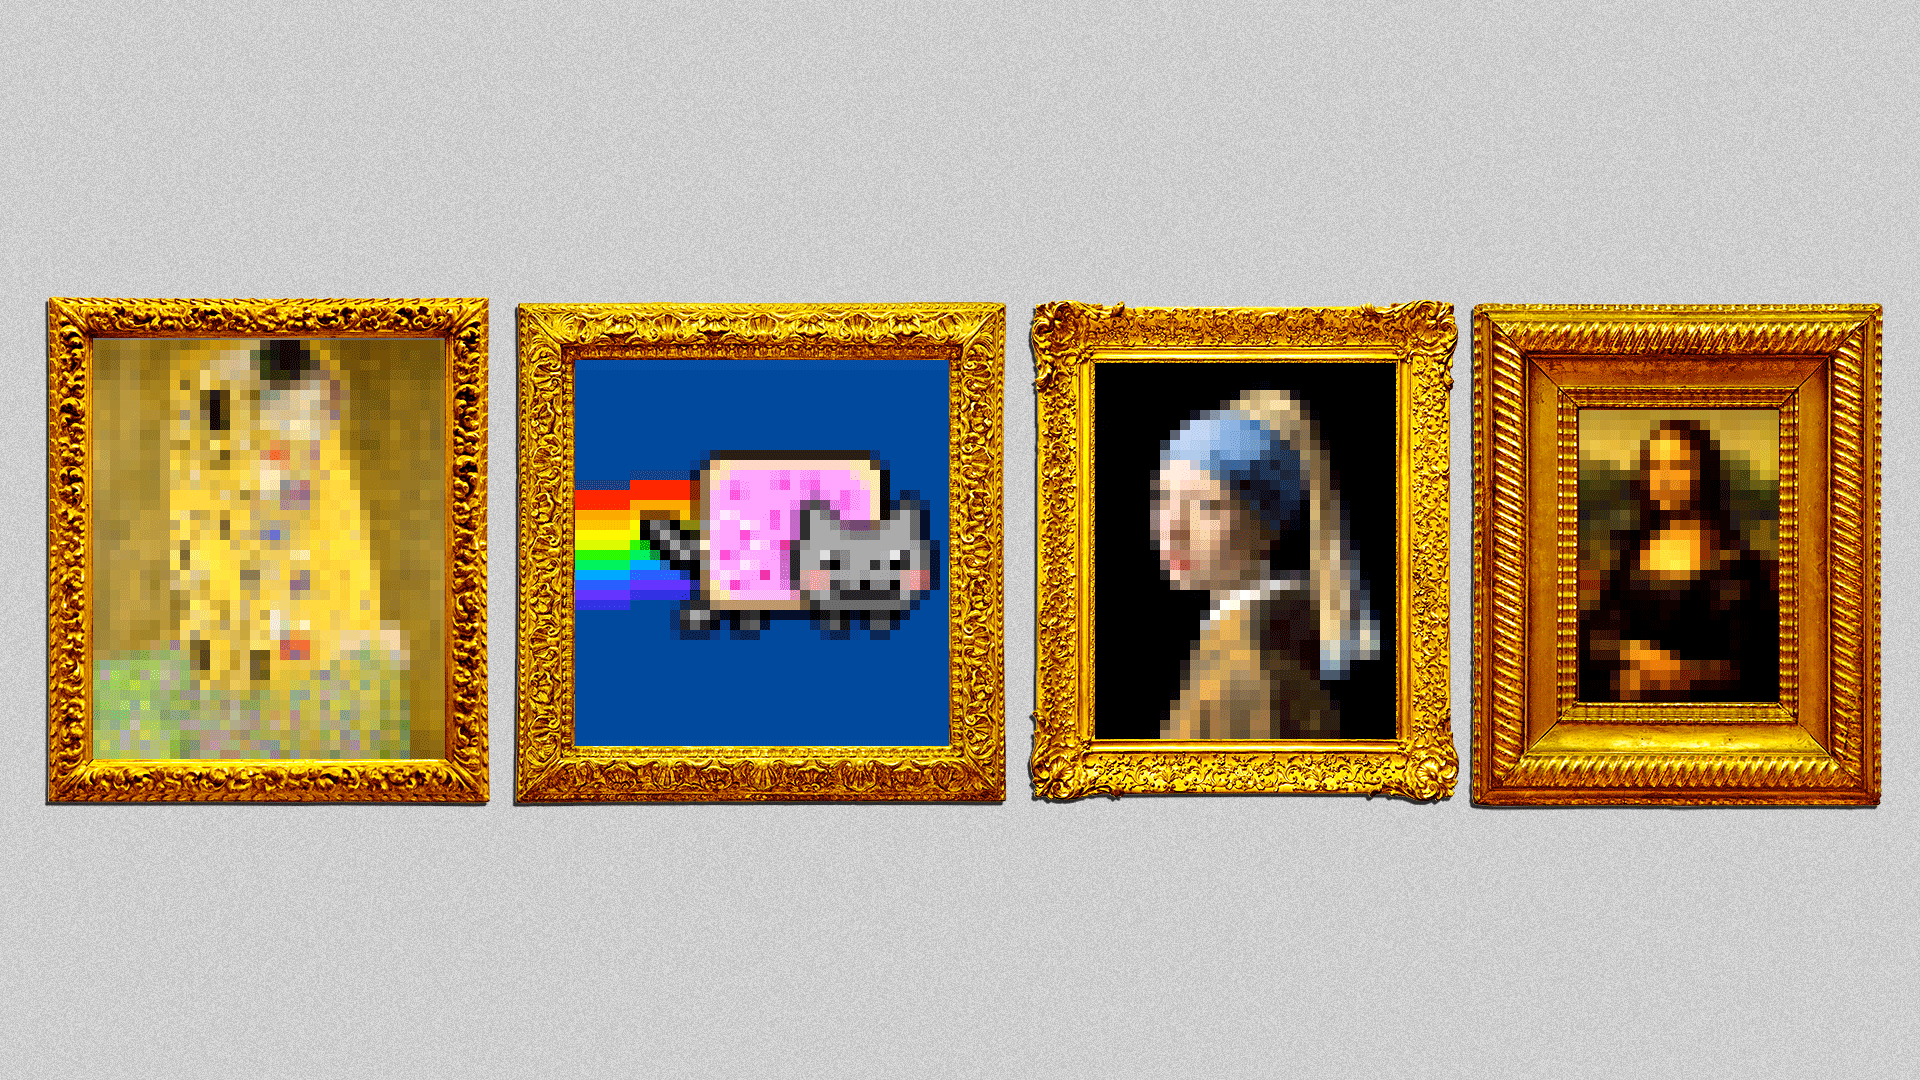 Illustration of famous paintings and nyan cat stylized as 8-bit pieces of art hanging in fancy frames.